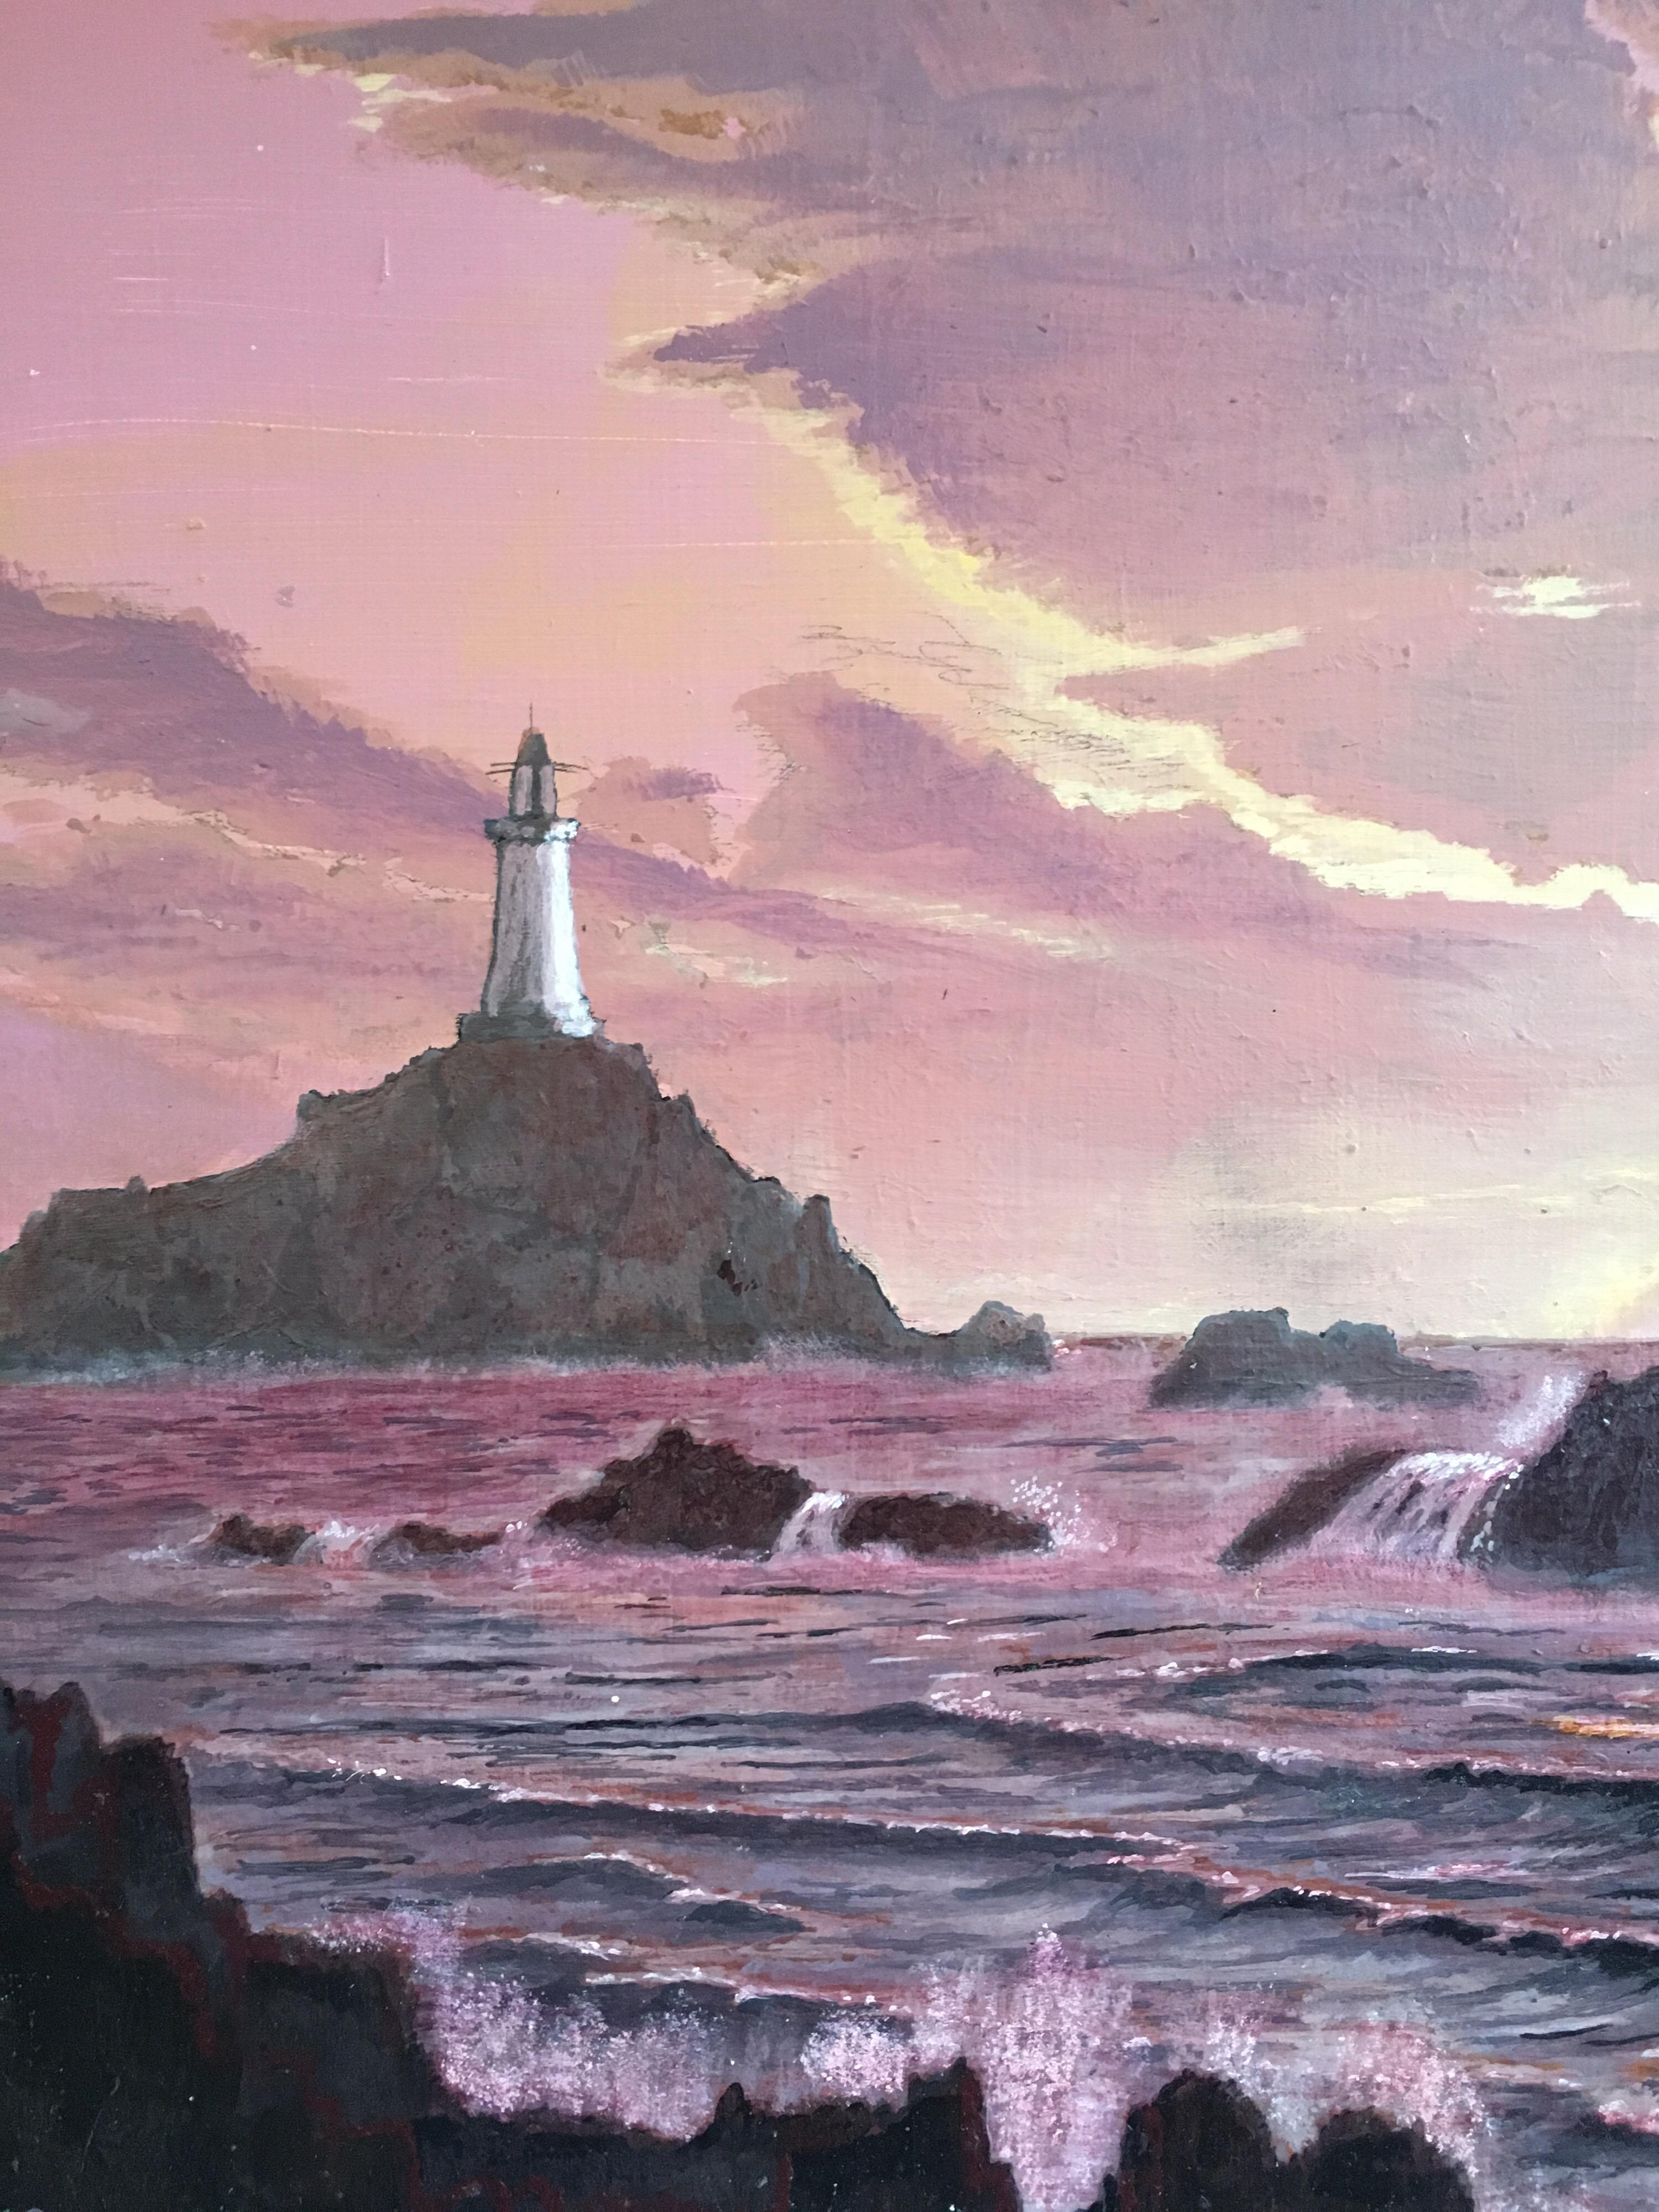 The Lighthouse, Sunset Landscape Large Signed Oil Painting - Brown Landscape Painting by Peter Nichols